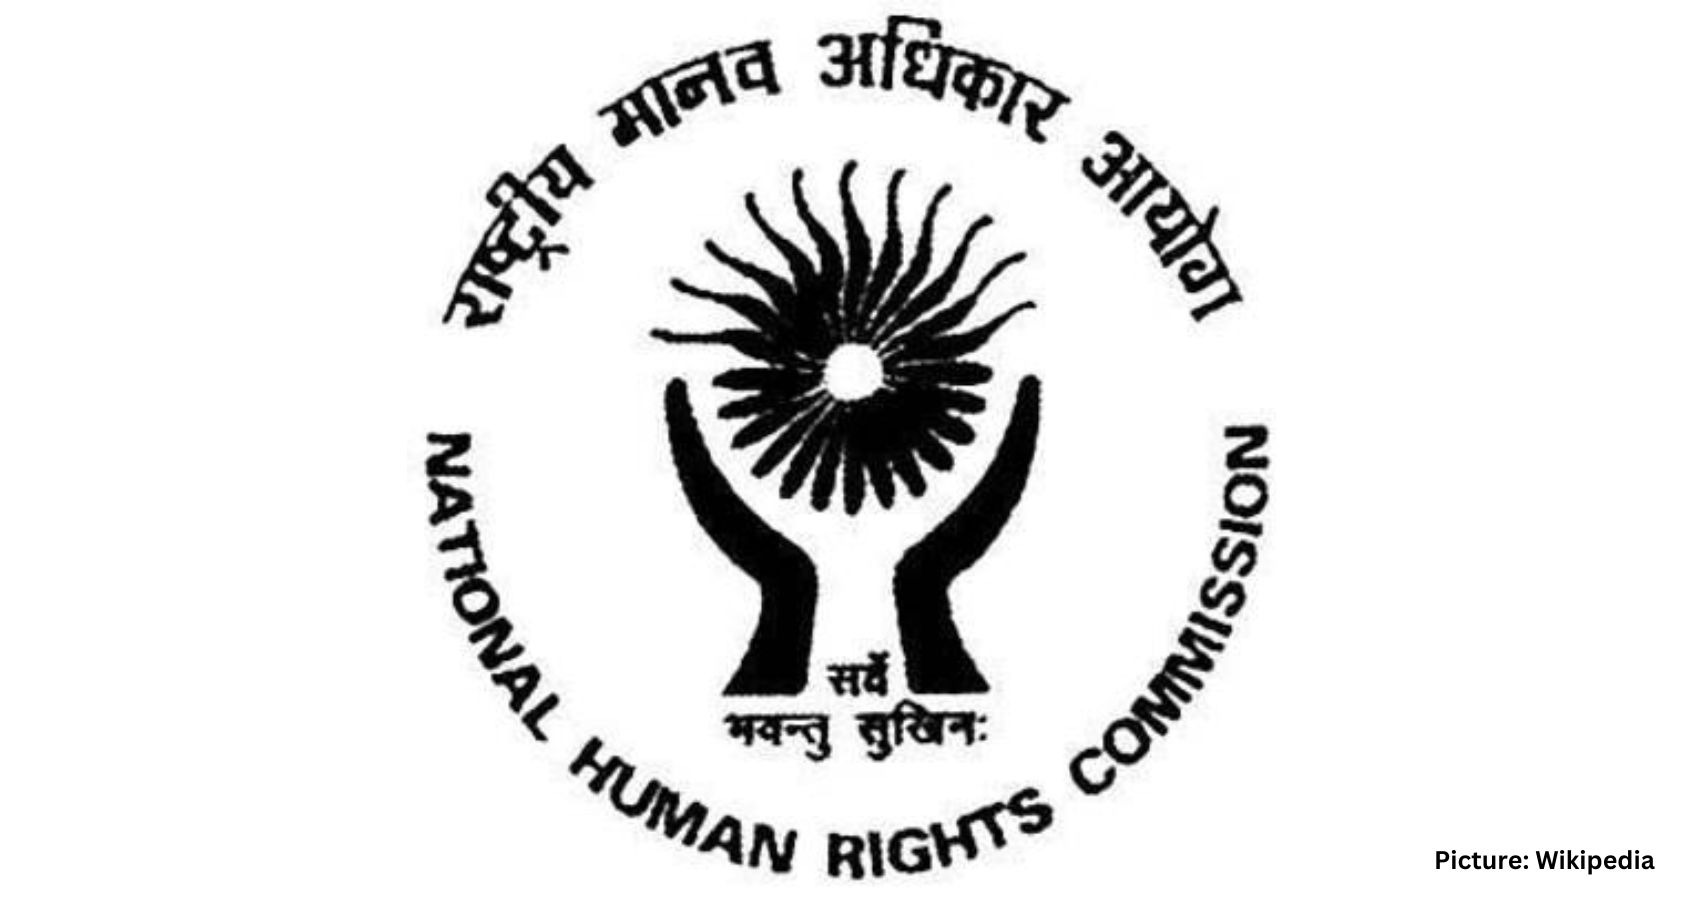 Featured & Cover India's NHRC Faces Scrutiny Upholding Human Rights Standards Amidst Accreditation Challenges